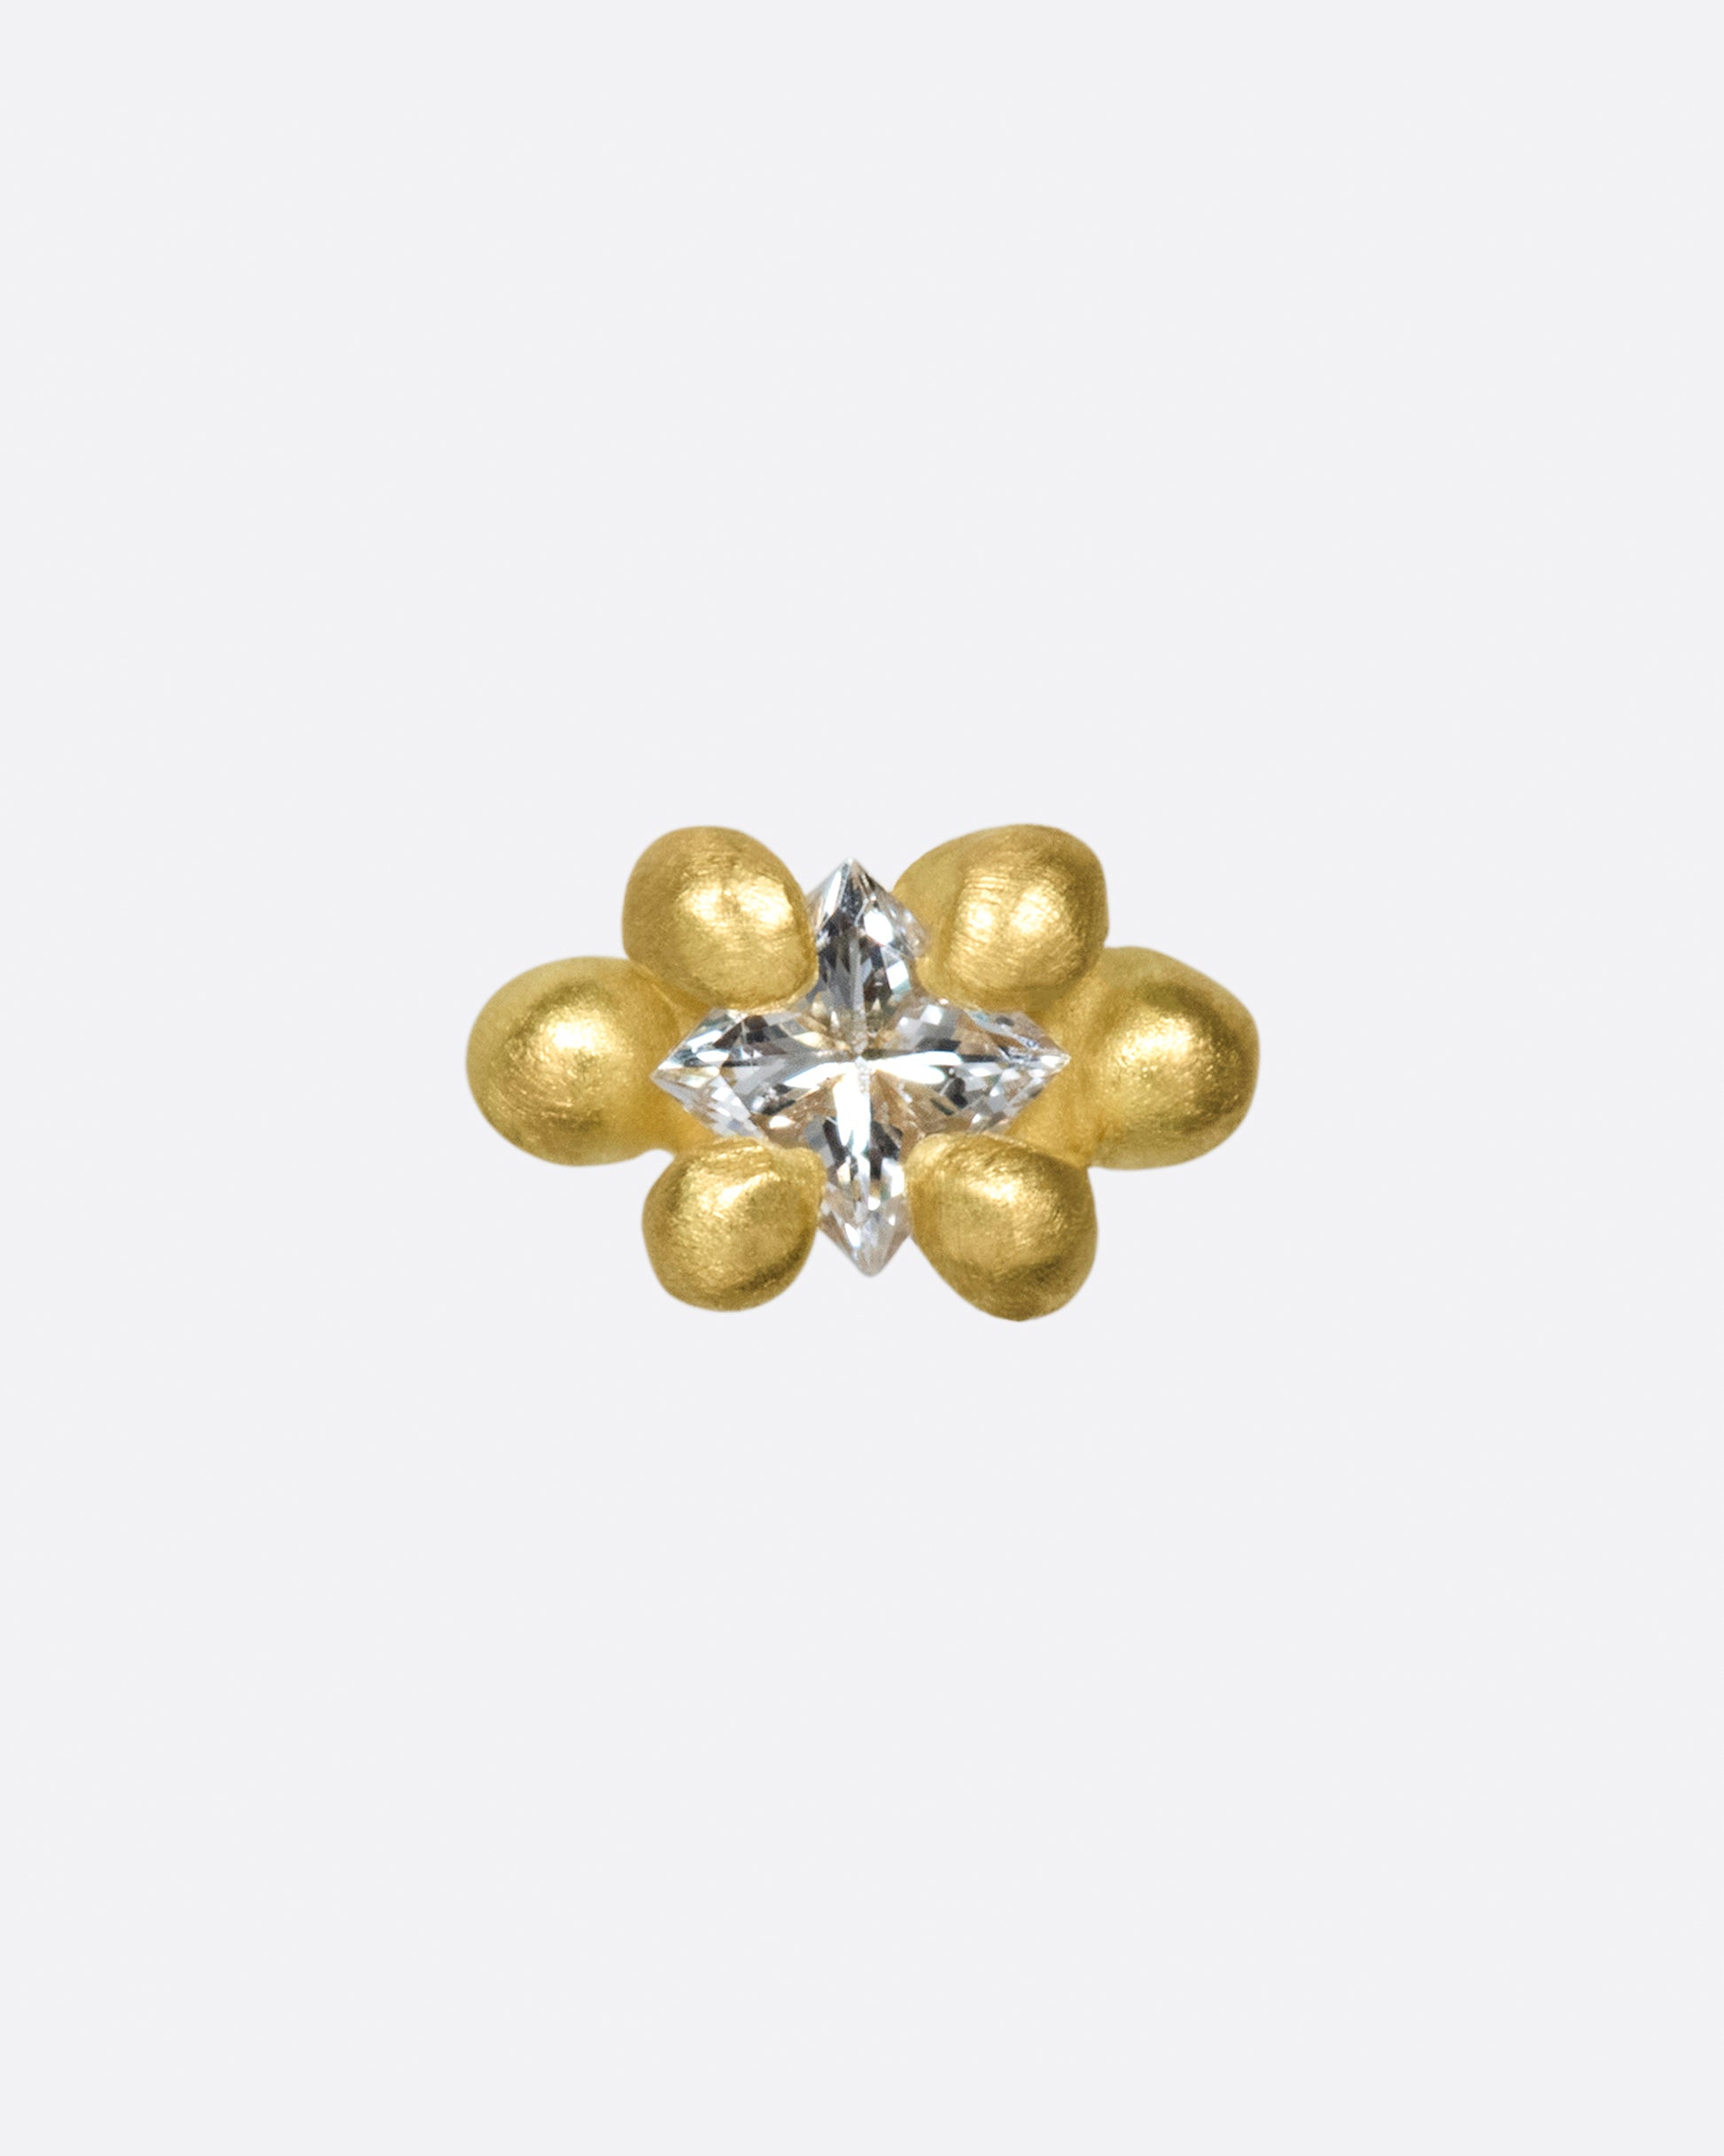 This solitaire stud's matte gold prongs make it more substantial, while remaining soft looking.